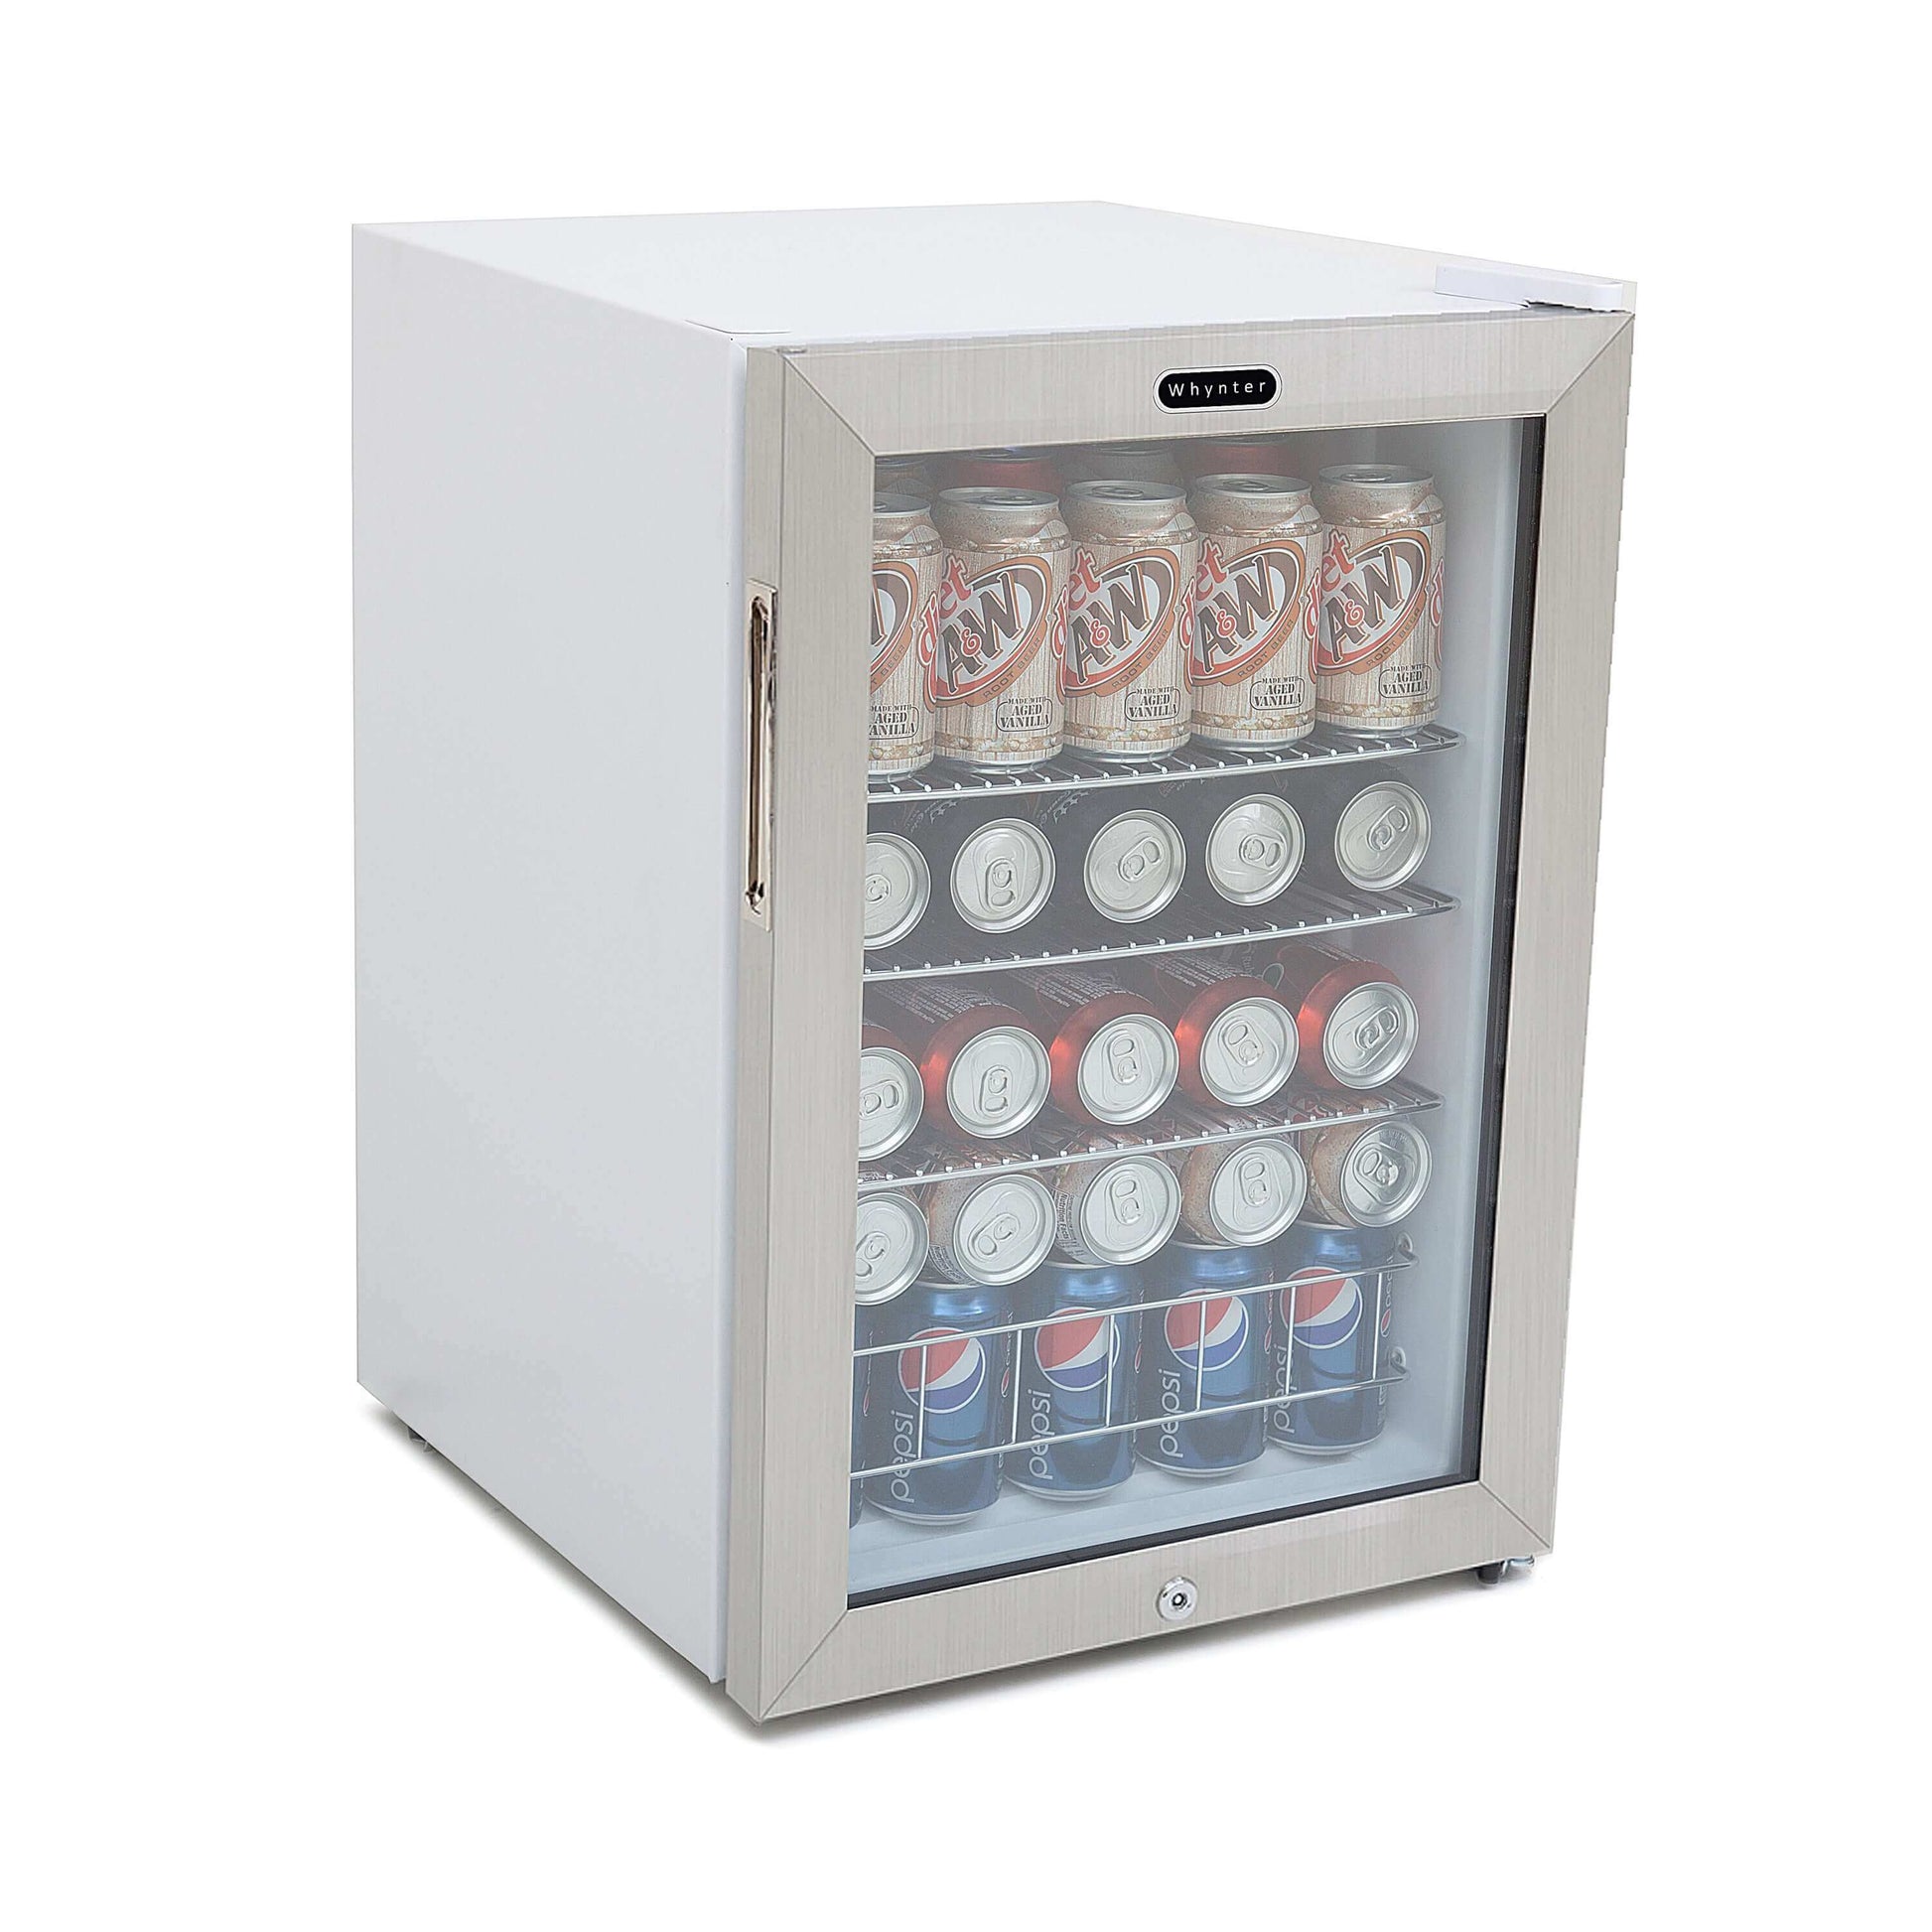 Whynter BR-091WS Beverage Refrigerator With Lock – Stainless Steel 90 Can Capacity